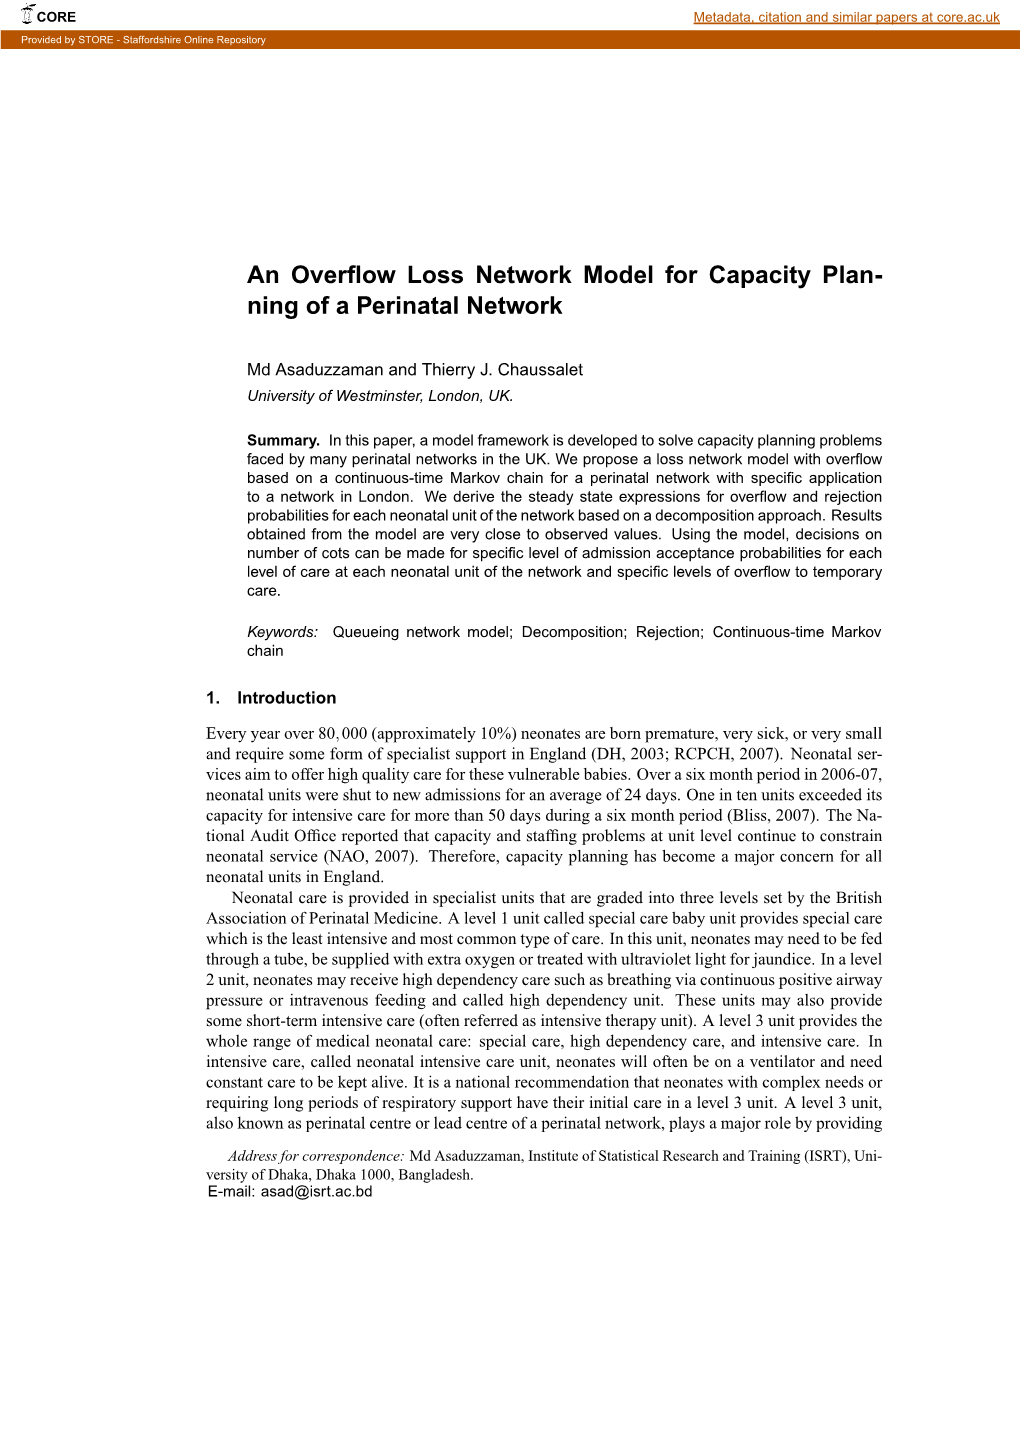 An Overflow Loss Network Model for Capacity Plan